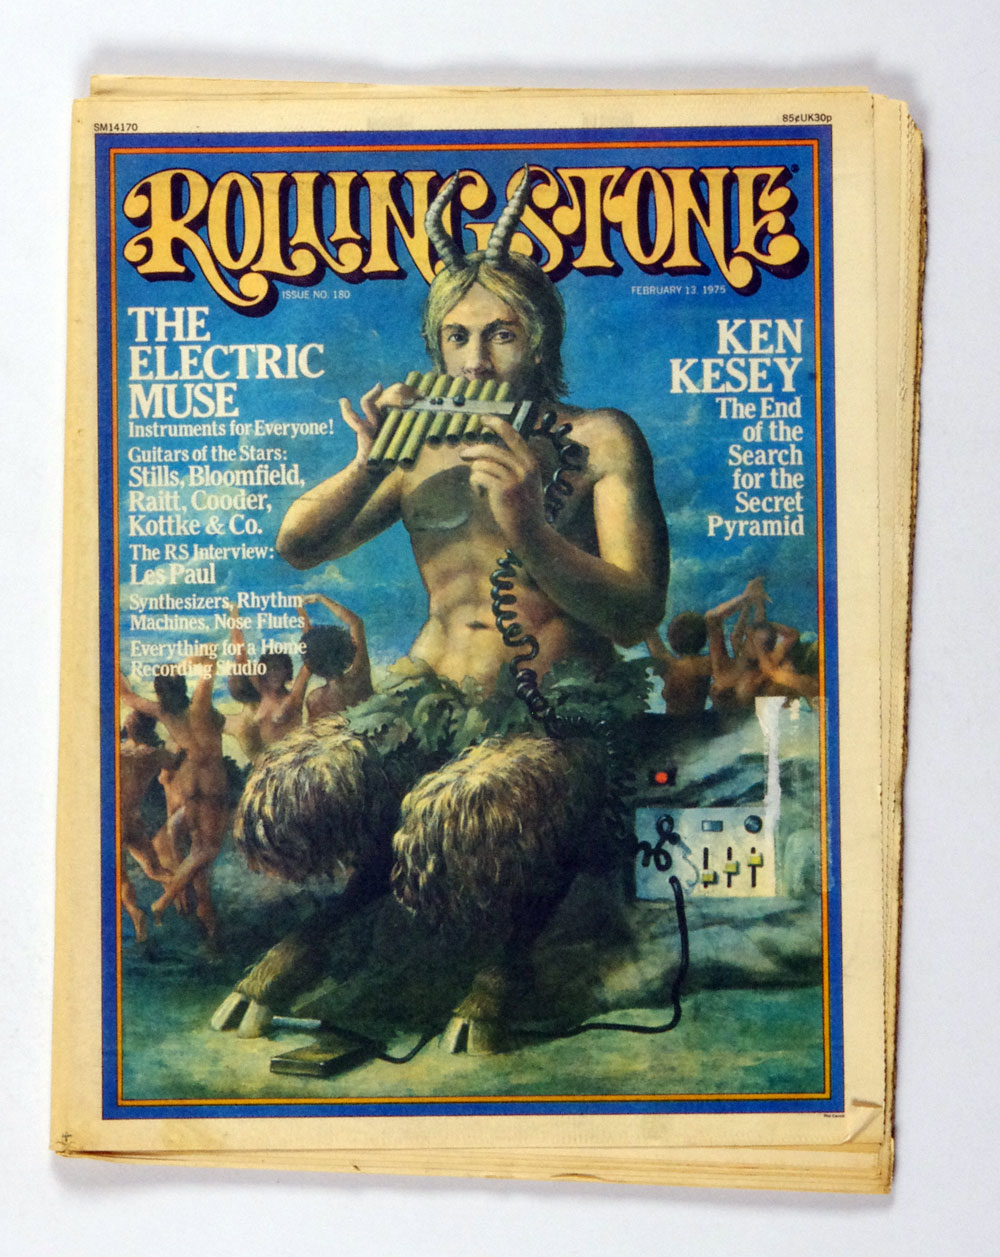 Rolling Stone Magazine Back Issue 1975 Feb 13 No. 180 Electric Muse